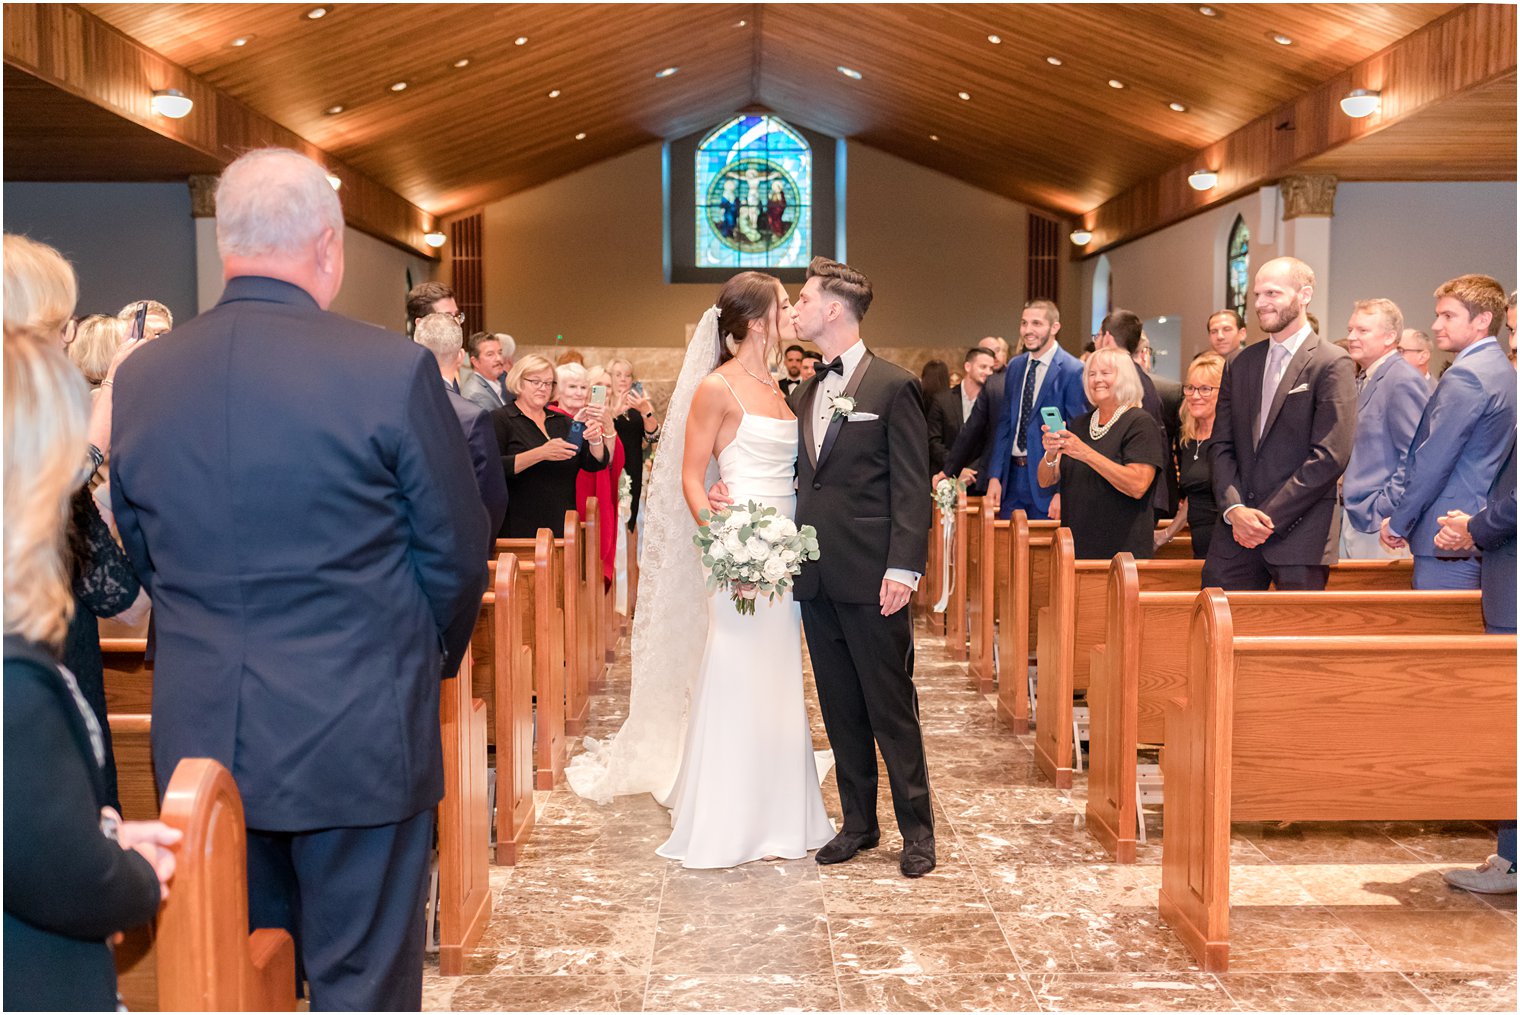 newlyweds leave traditional church ceremony in small New Jersey church